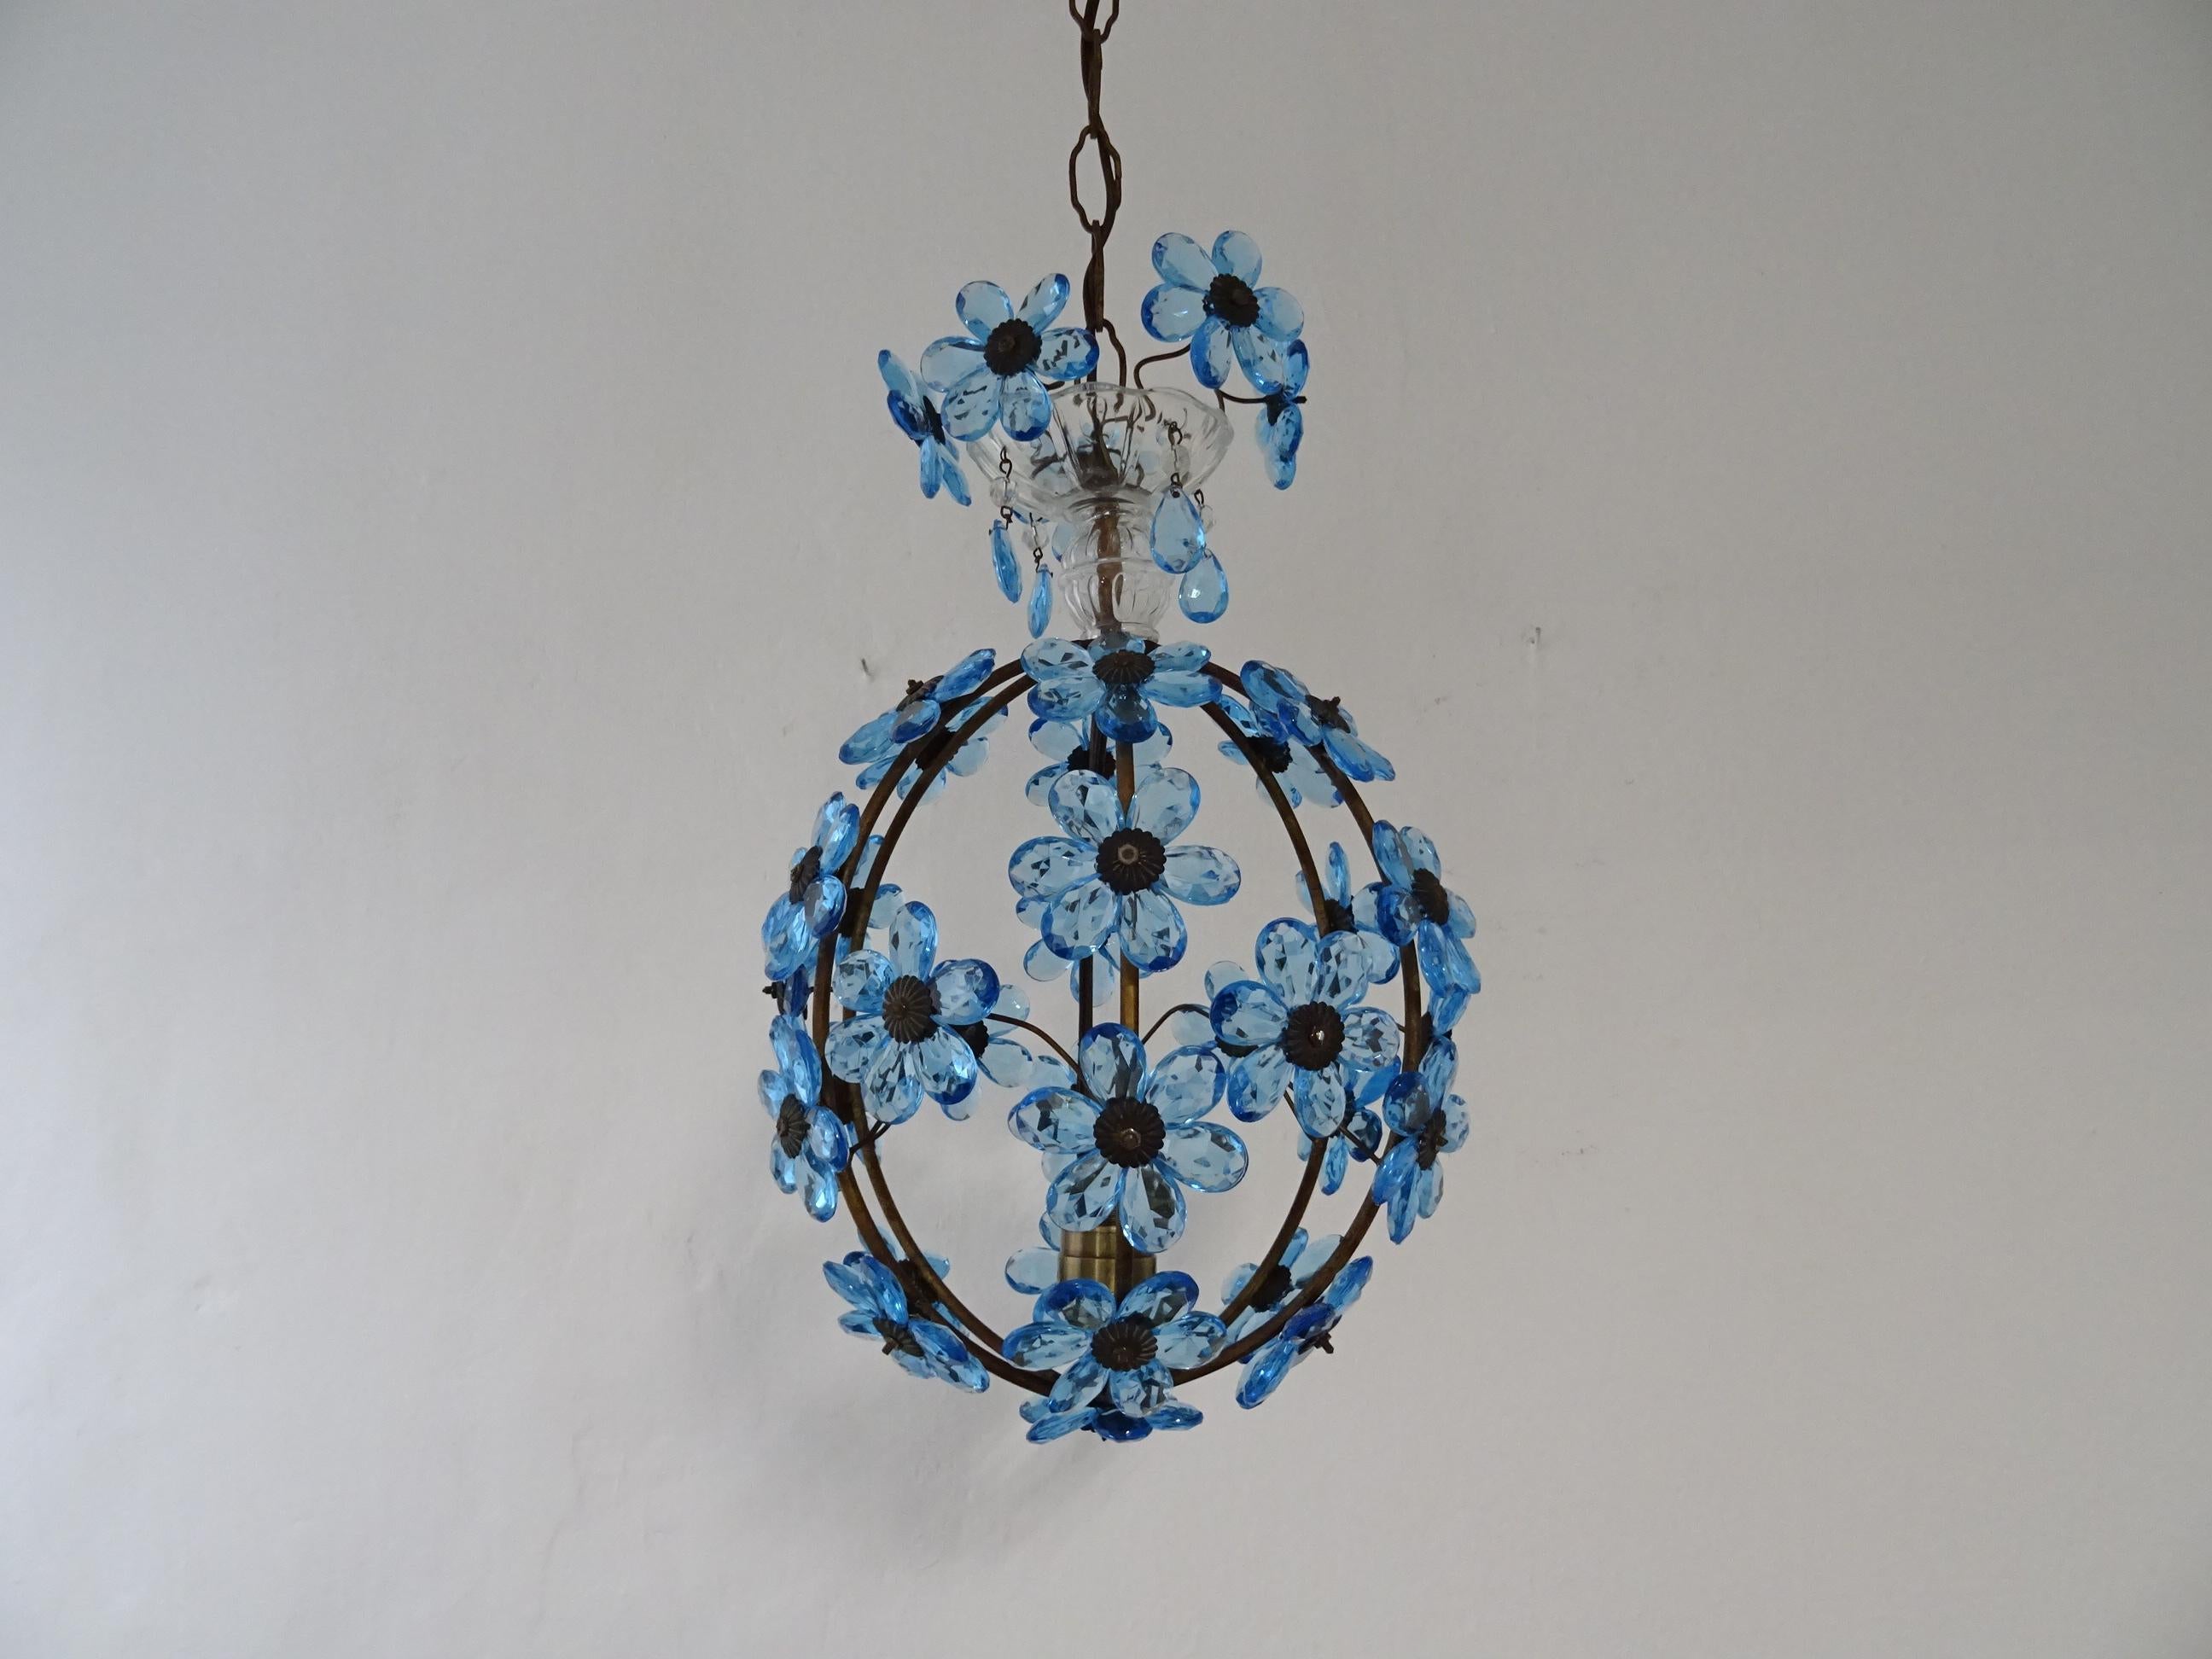 Housing 1 big light inside. Chandelier has been newly rewired with certified US UL socket for the USA and appropriate socket and ready to hang. Blue crystal prisms, 6 petals each and 36 total flowers. Murano glass and crystal bobèche dripping with